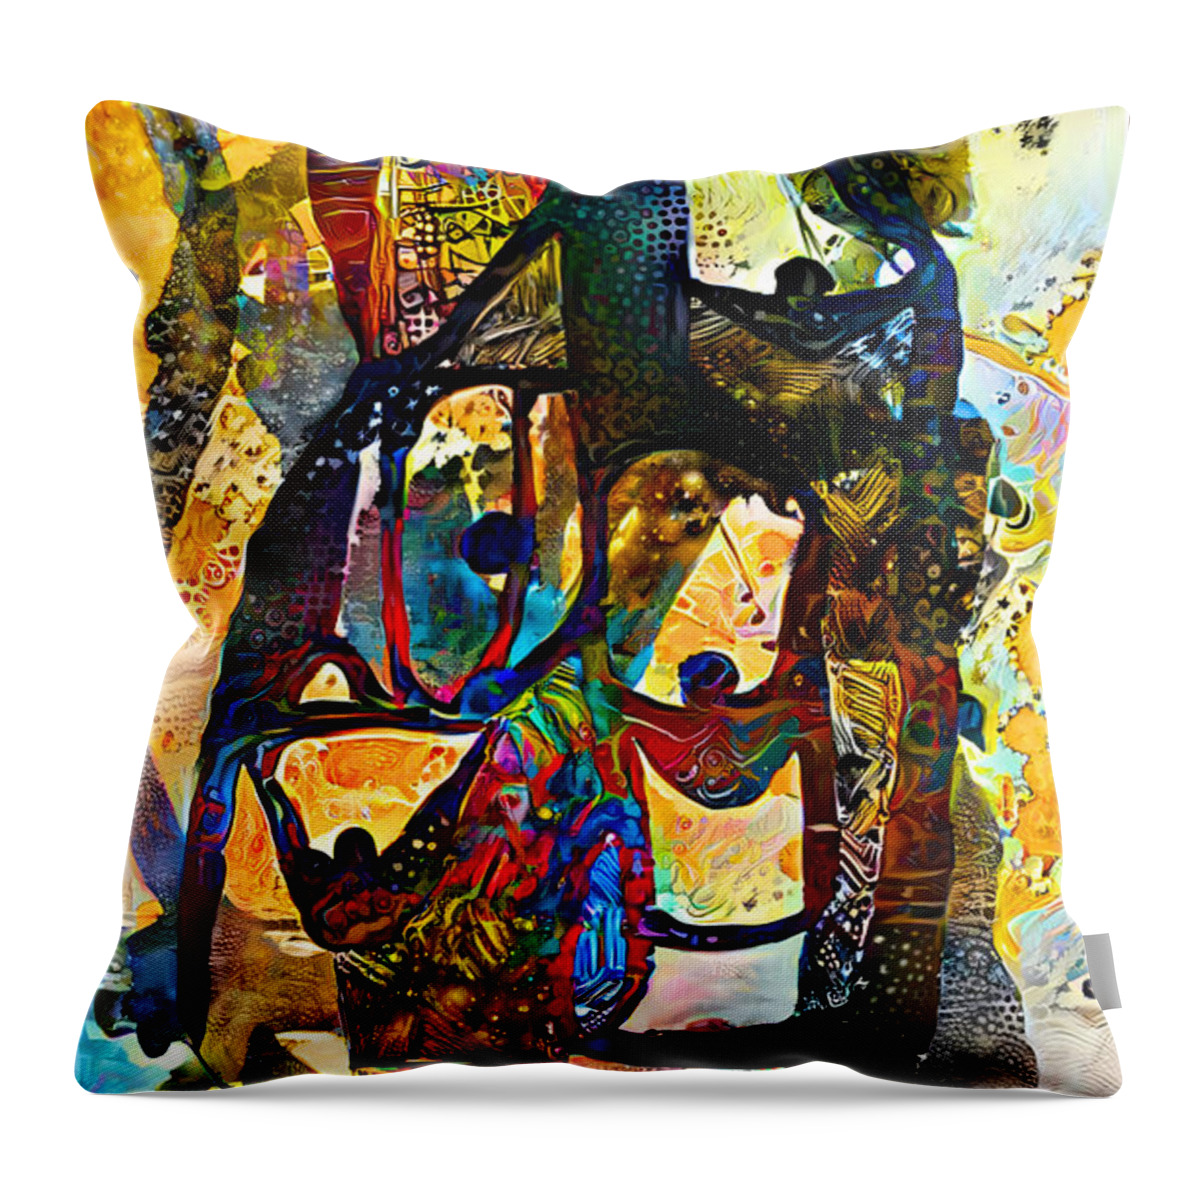 Contemporary Art Throw Pillow featuring the digital art 88 by Jeremiah Ray